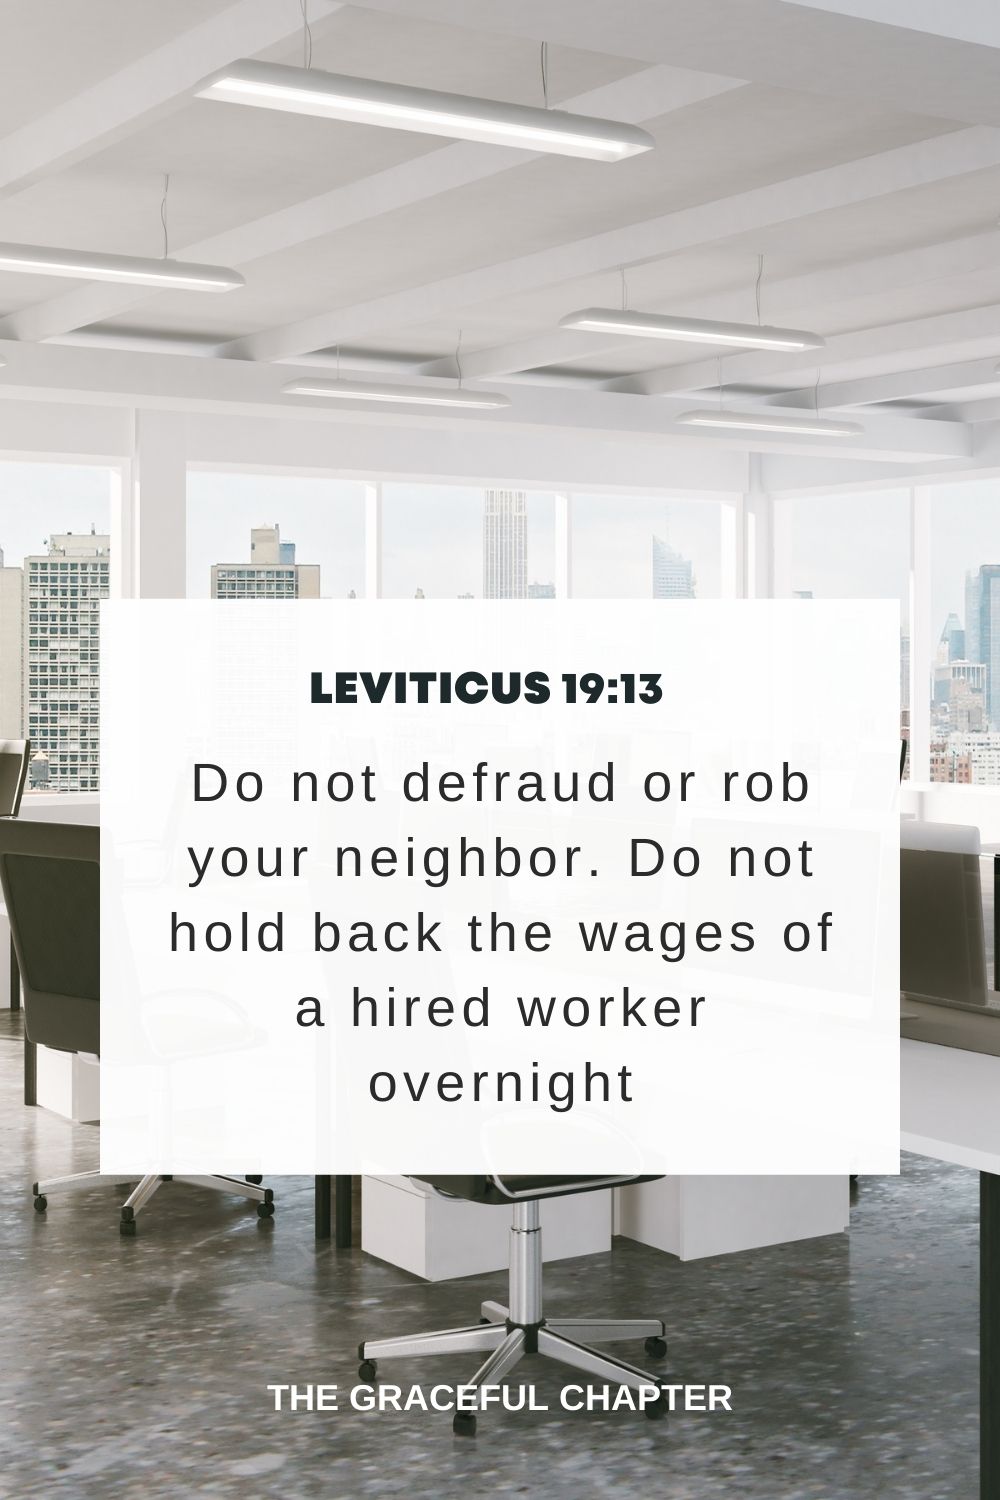 Do not defraud or rob your neighbor. Do not hold back the wages of a hired worker overnight. Leviticus 19:13